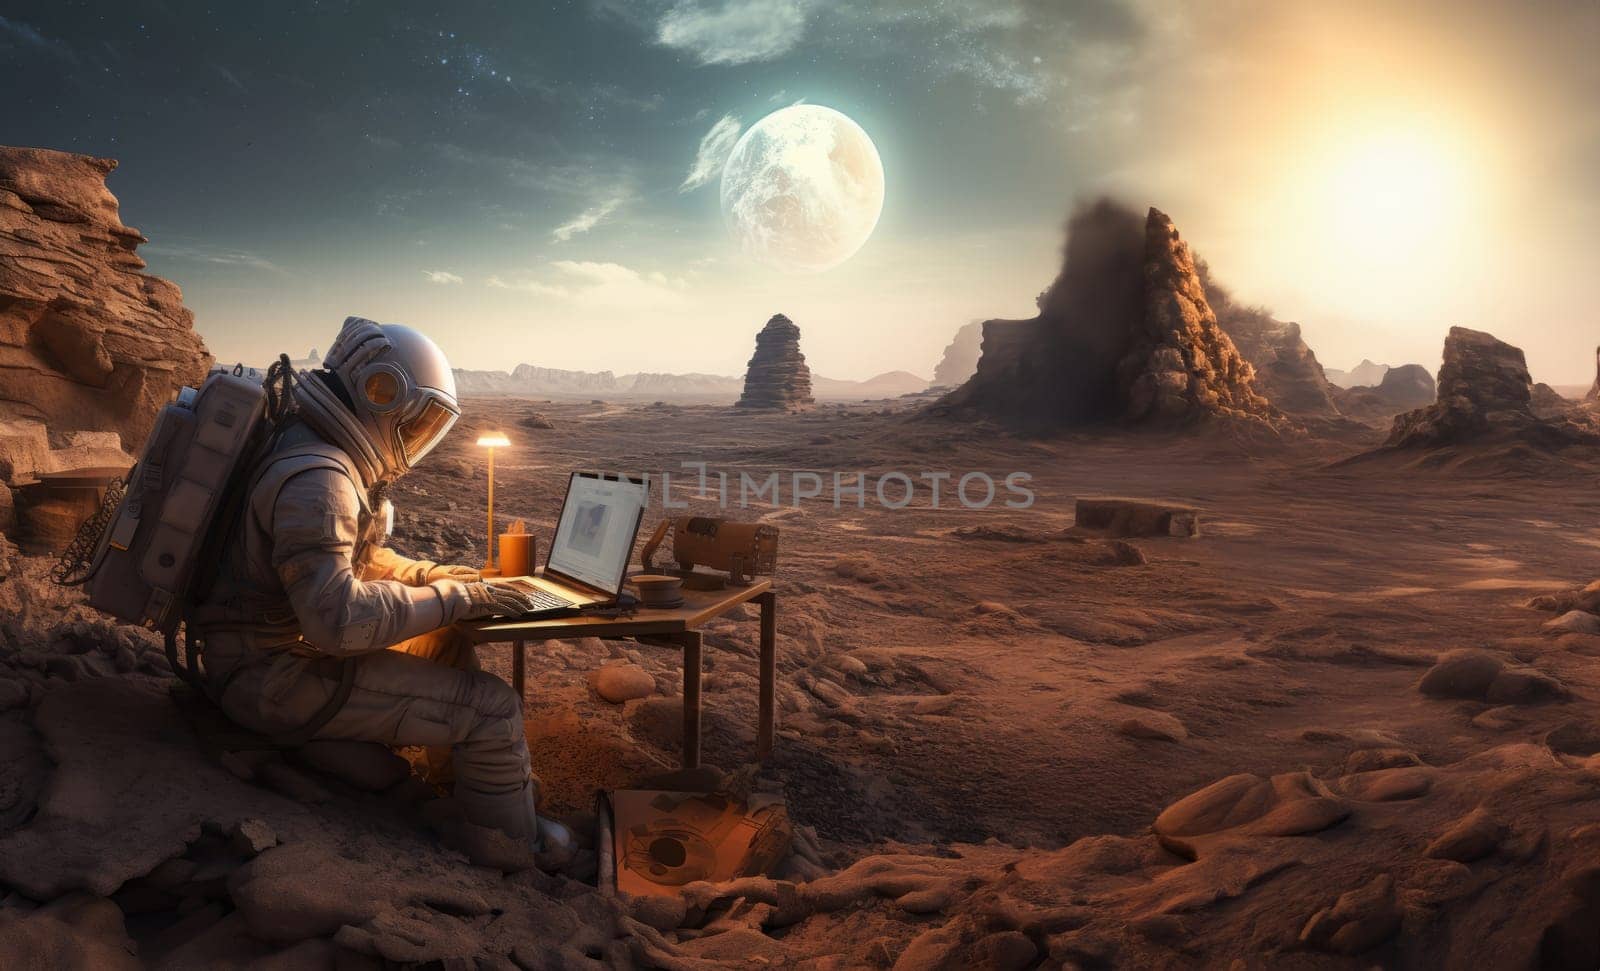 An astronaut on Mars utilizes a laptop during the enchanting sunset, blending the realms of technology and exploration on the red planet, symbolizing the cosmic connection between human innovation and the extraterrestrial landscape.Generated image.